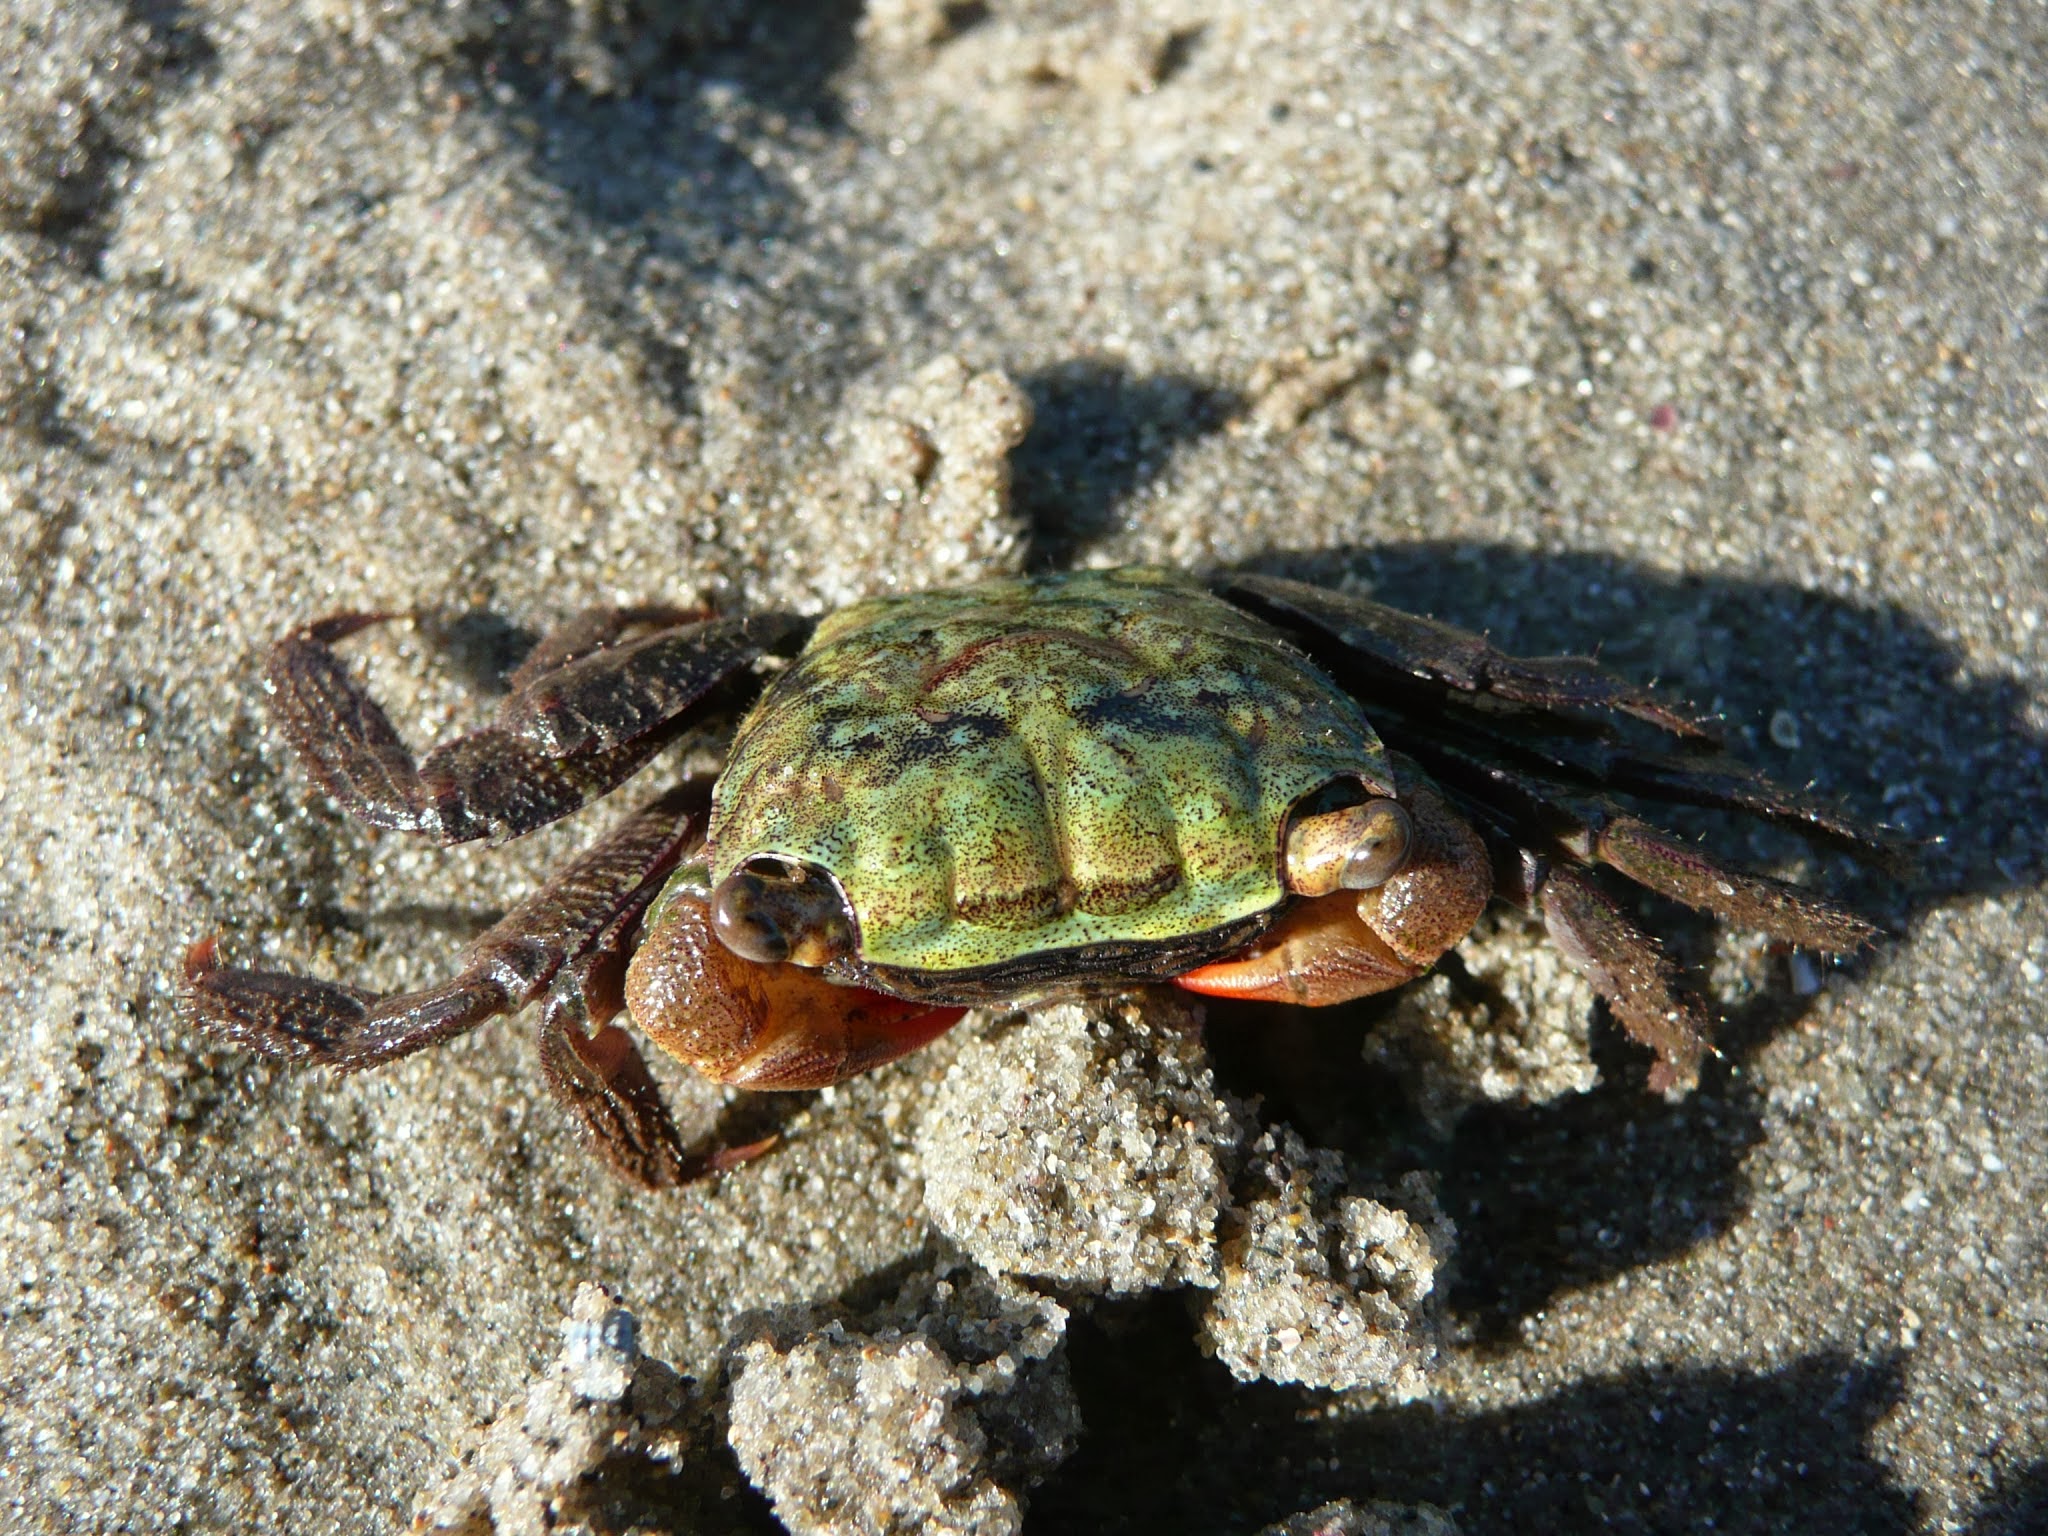 A large crab sits on wet sand.